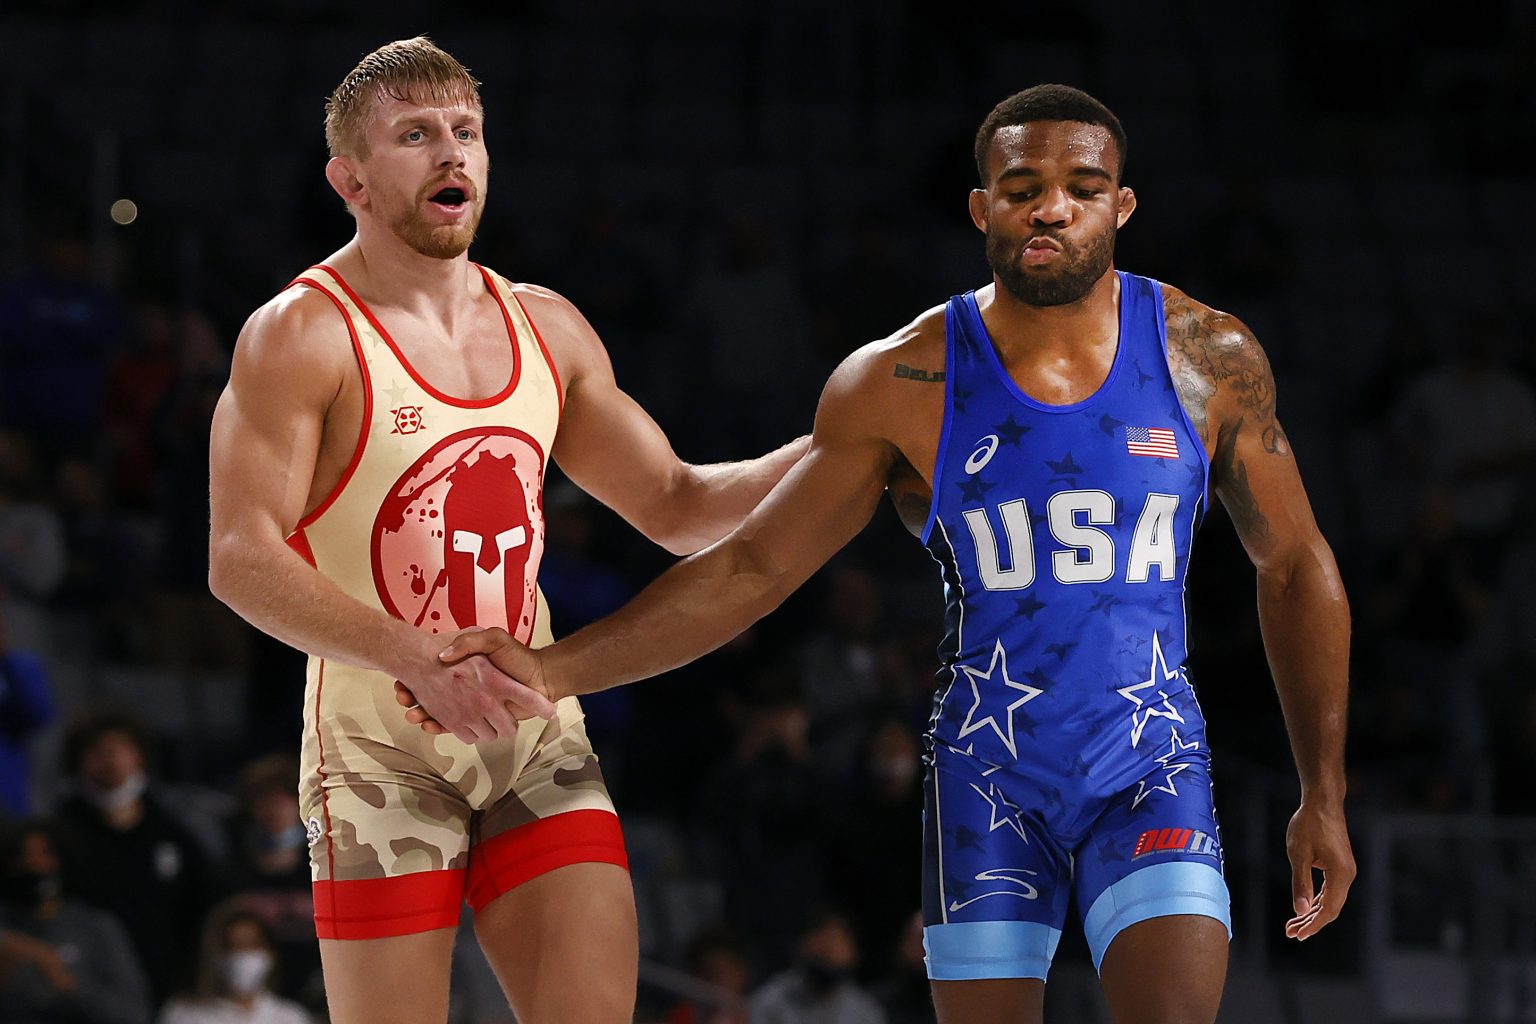 Did the Olympics Remove Wrestling?